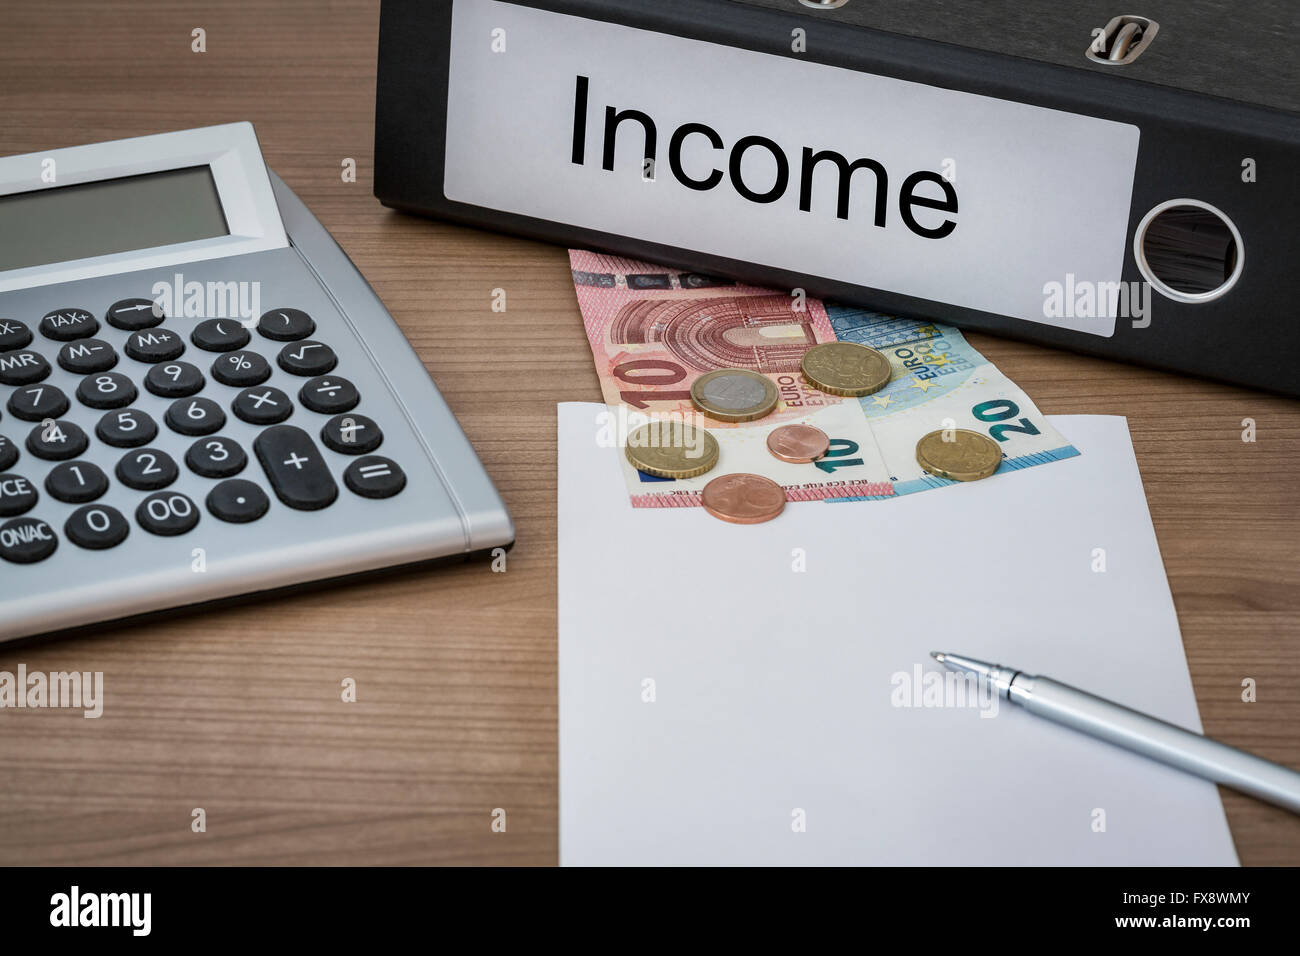 Income written on a binder on a desk with euro money calculator blank sheet and pen Stock Photo